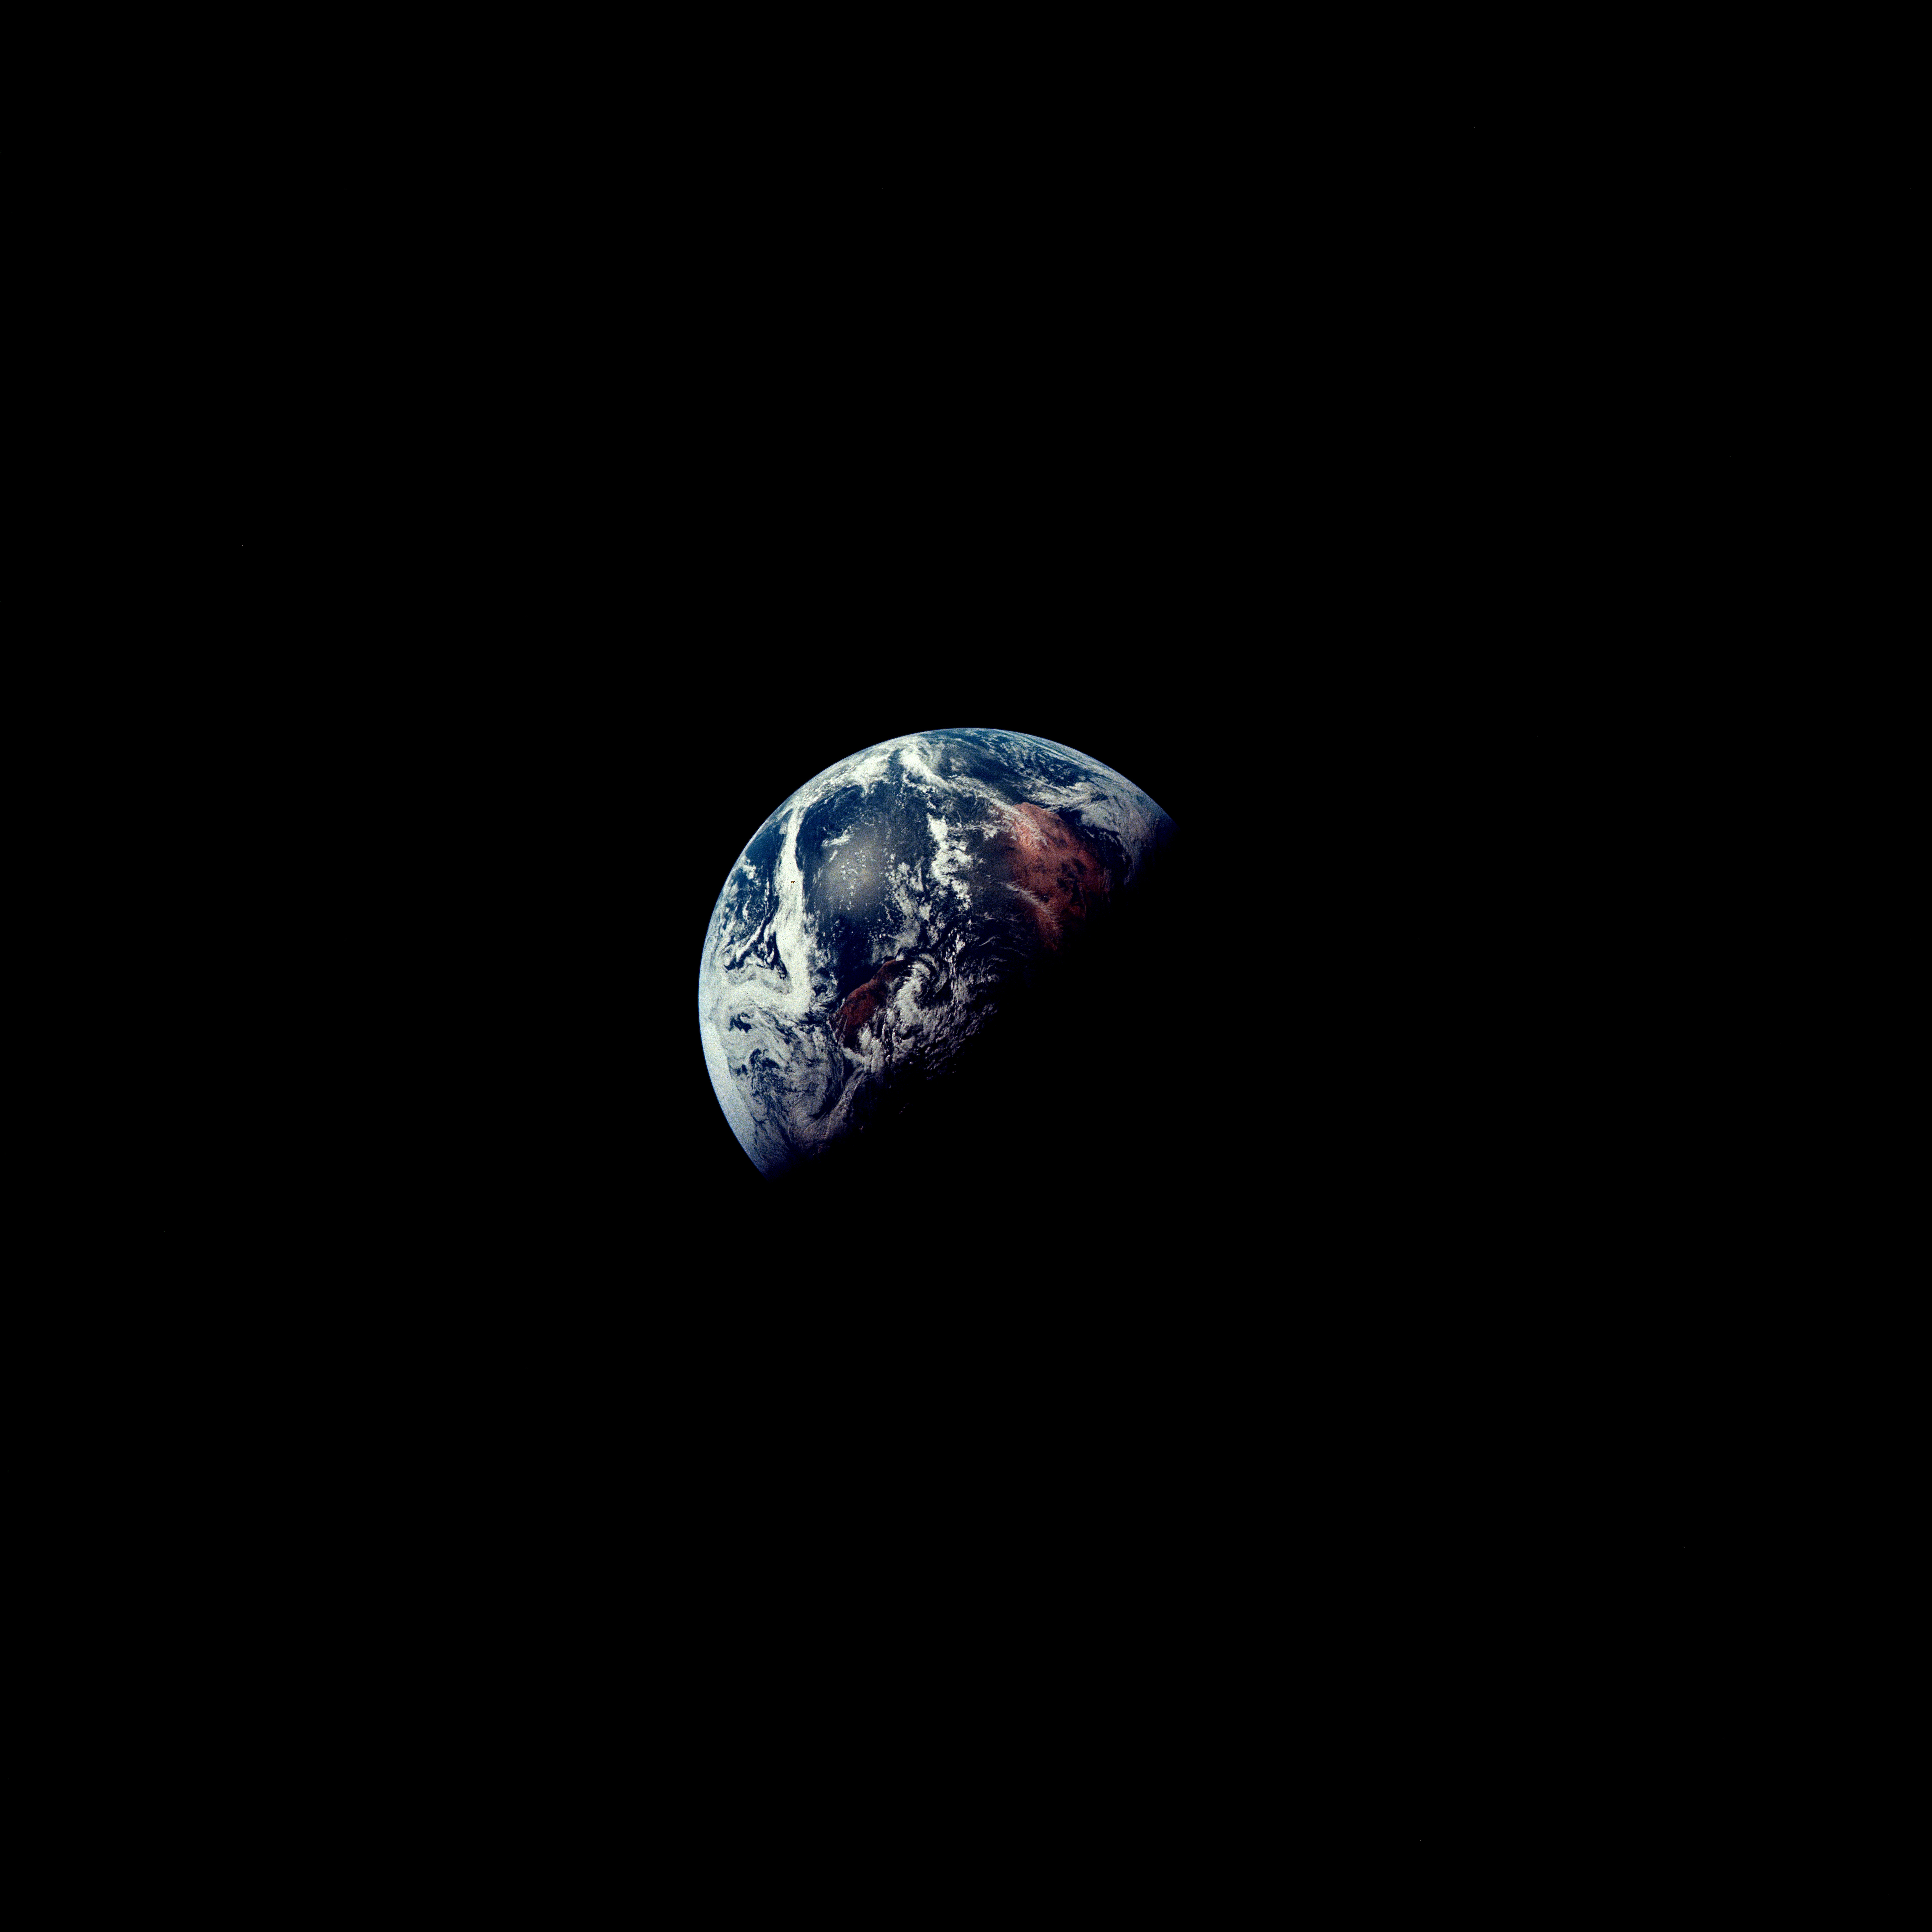 wallpapers earth, universe, dark, planet, land, shadow